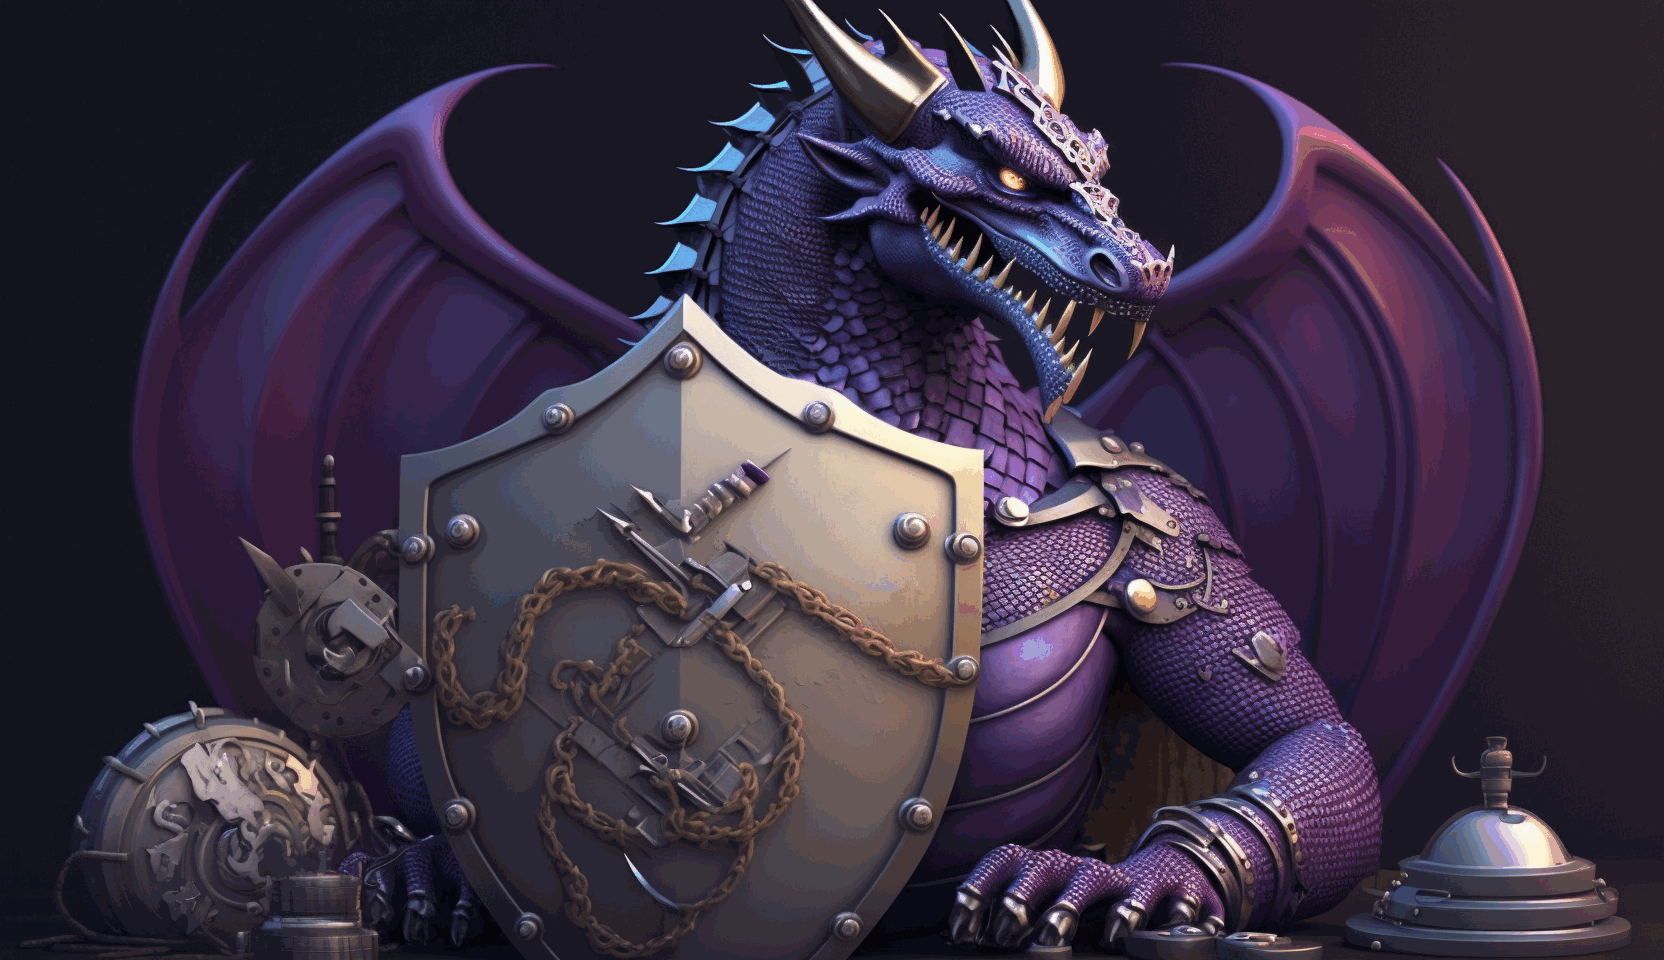 A 3D animated Kali Linux dragon mascot, surrounded by various cybersecurity and hacking tools, sitting on top of a shield with a purple dragon on it.